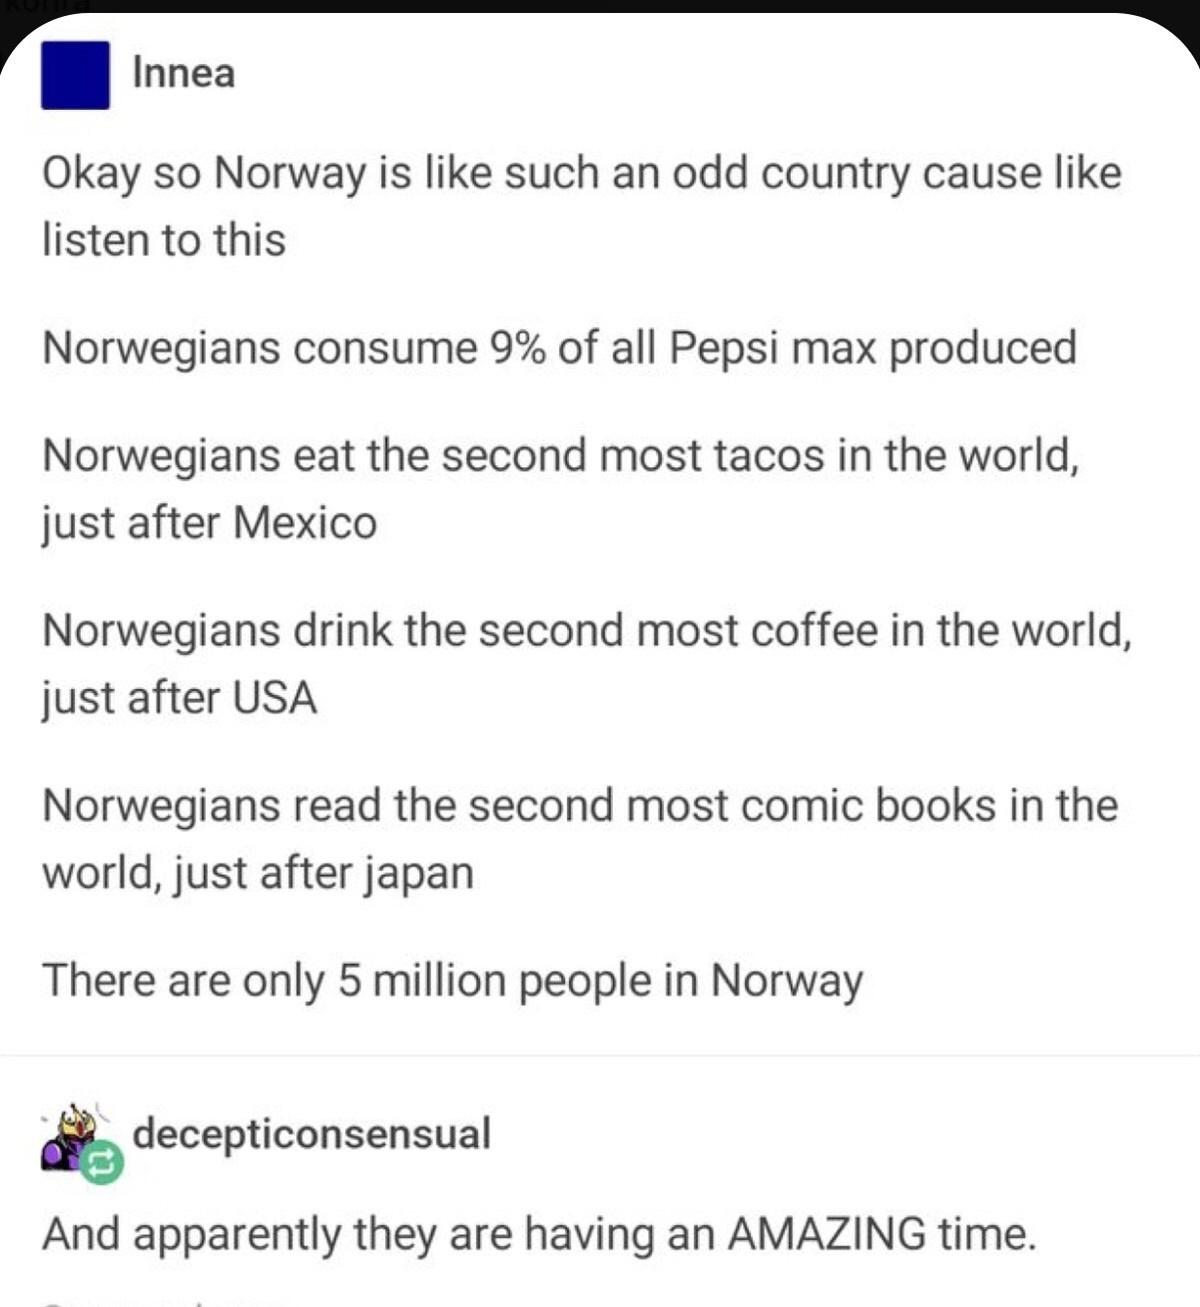 document - Innea Okay so Norway is such an odd country cause listen to this Norwegians consume 9% of all Pepsi max produced Norwegians eat the second most tacos in the world, just after Mexico Norwegians drink the second most coffee in the world, just aft